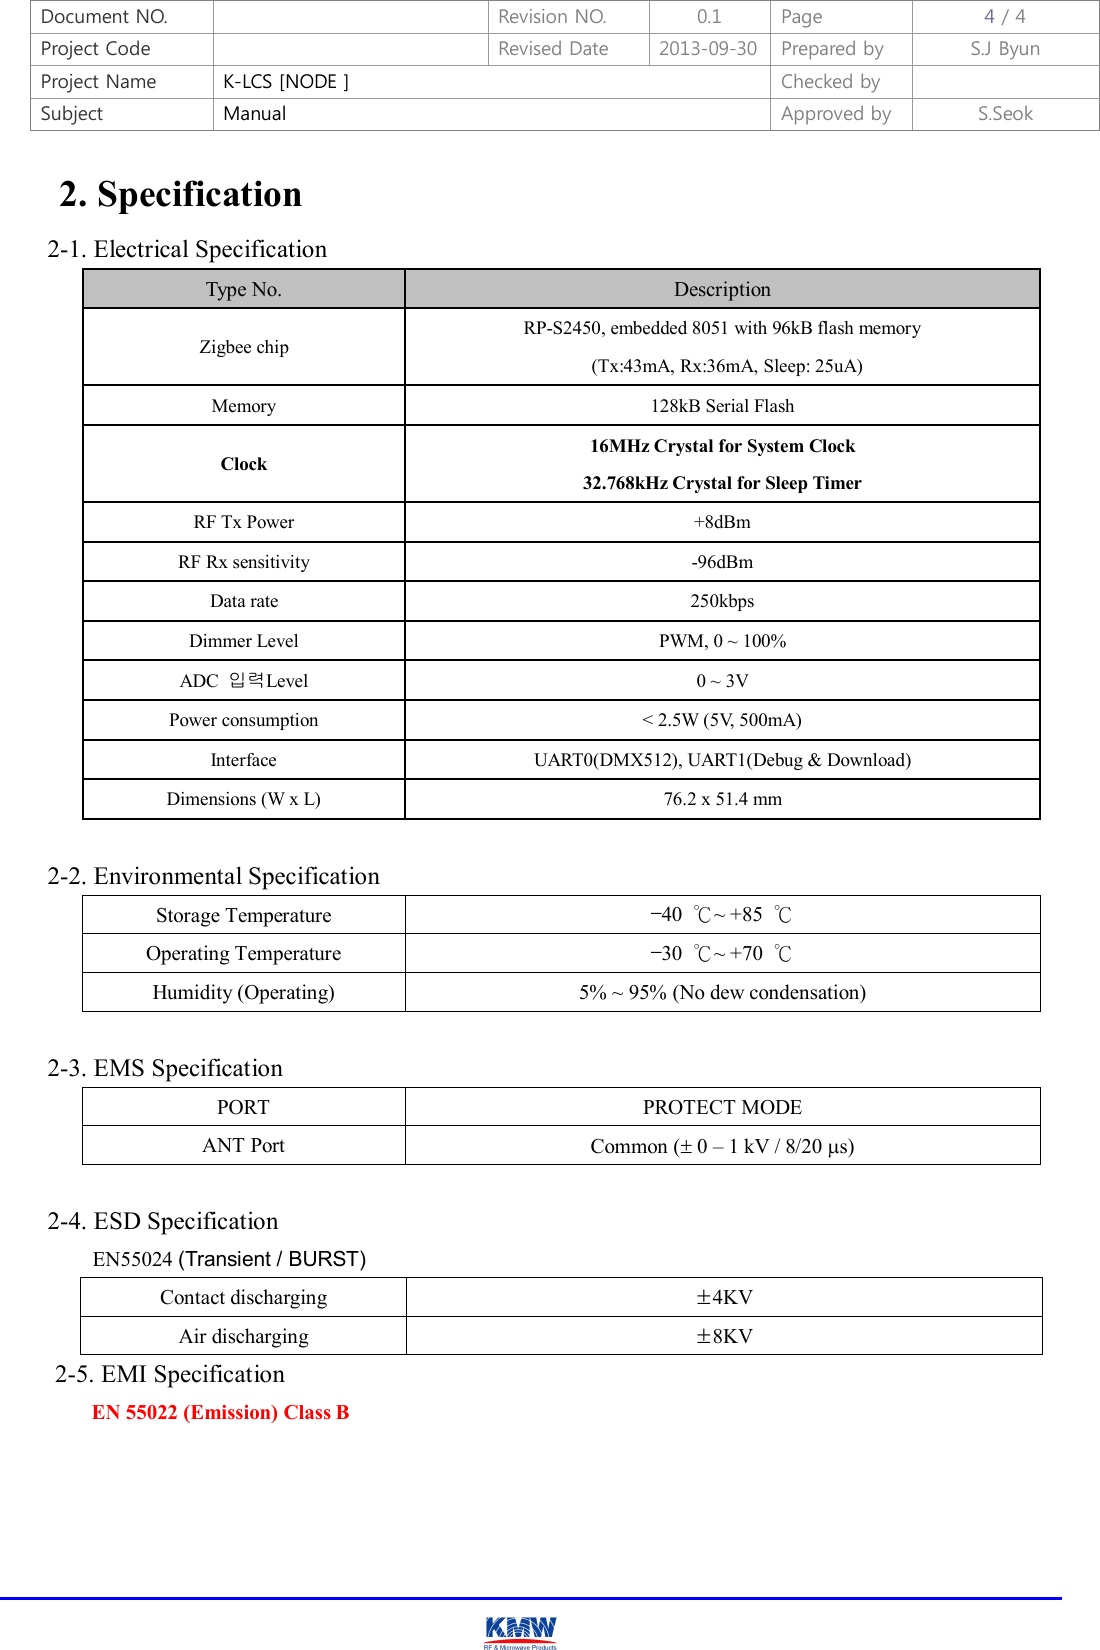 Document NO.    Revision NO.  0.1  Page  4 / 4 Project Code    Revised Date  2013-09-30 Prepared by  S.J Byun  Project Name  K-LCS [NODE ]  Checked by   Subject  Manual  Approved by  S.Seok     2. Specification 2-1. Electrical Specification Type No.  Description Zigbee chip RP-S2450, embedded 8051 with 96kB flash memory   (Tx:43mA, Rx:36mA, Sleep: 25uA) Memory  128kB Serial Flash Clock   16MHz Crystal for System Clock 32.768kHz Crystal for Sleep Timer   RF Tx Power  +8dBm RF Rx sensitivity  -96dBm Data rate  250kbps Dimmer Level  PWM, 0 ~ 100% ADC  입력Level  0 ~ 3V Power consumption  &lt; 2.5W (5V, 500mA) Interface  UART0(DMX512), UART1(Debug &amp; Download) Dimensions (W x L)  76.2 x 51.4 mm  2-2. Environmental Specification Storage Temperature  –40  ℃~ +85  ℃ Operating Temperature  –30  ℃~ +70  ℃ Humidity (Operating)  5% ~ 95% (No dew condensation)  2-3. EMS Specification PORT  PROTECT MODE ANT Port  Common ( 0 – 1 kV / 8/20 s)  2-4. ESD Specification EN55024 (Transient / BURST) Contact discharging  ±4KV Air discharging  ±8KV 2-5. EMI Specification   EN 55022 (Emission) Class B   